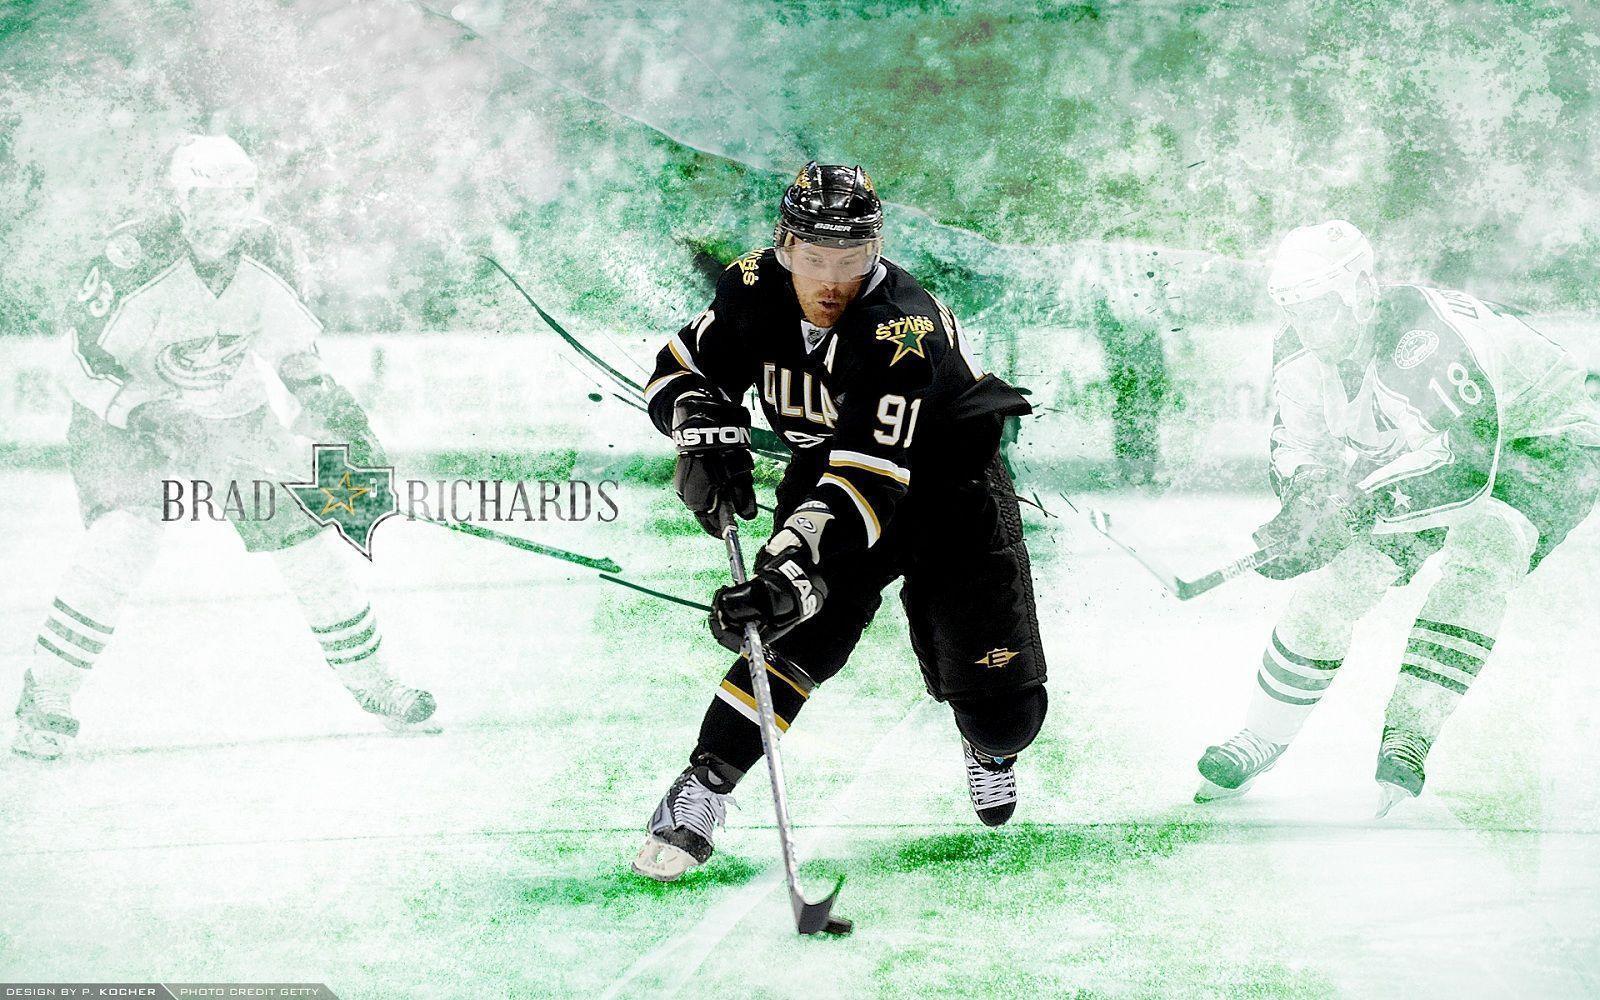 Dallas Stars - We're taking it back to 1993 for Wallpaper